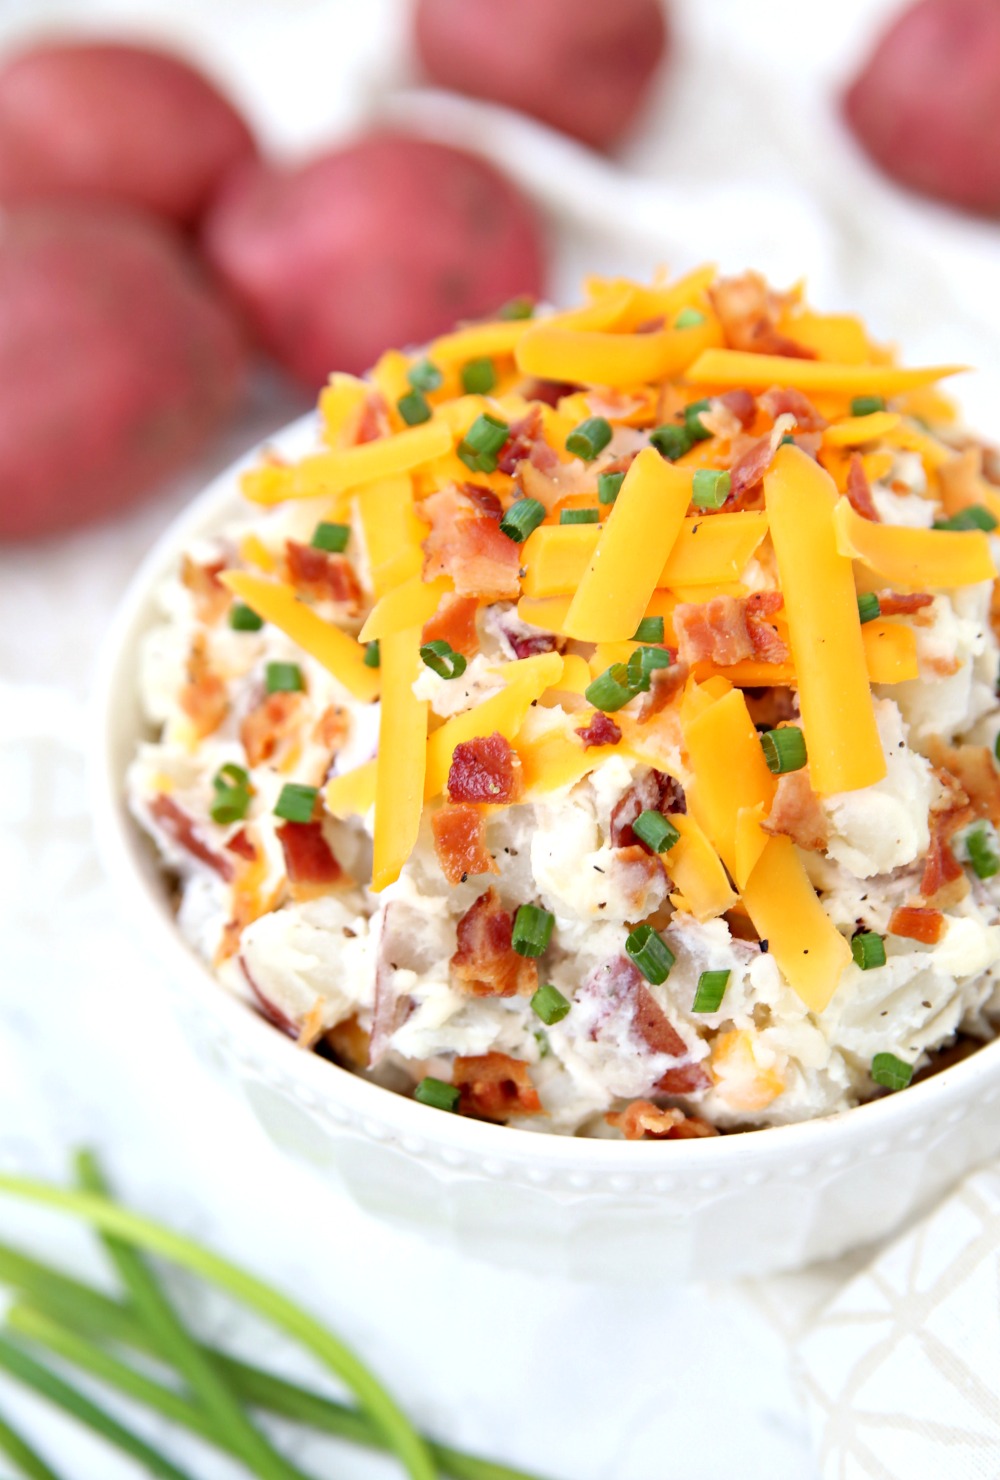 Loaded Baked Potato Salad Recipe A delicious side dish perfect for parties and cookouts.